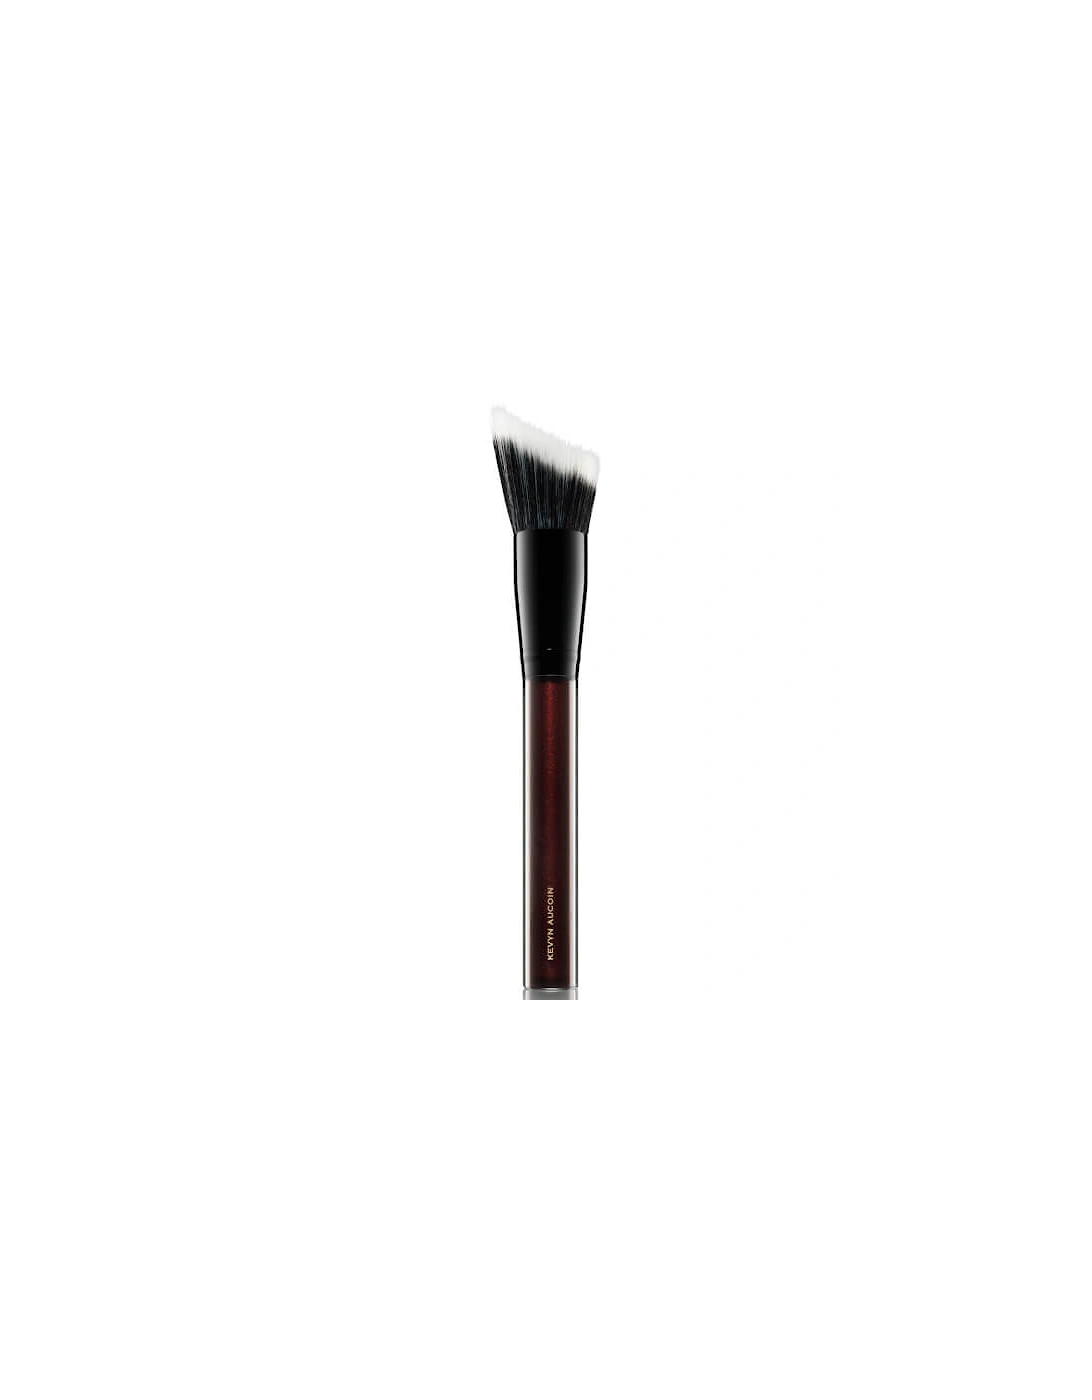 The Neo Powder Brush - Kevyn Aucoin, 2 of 1